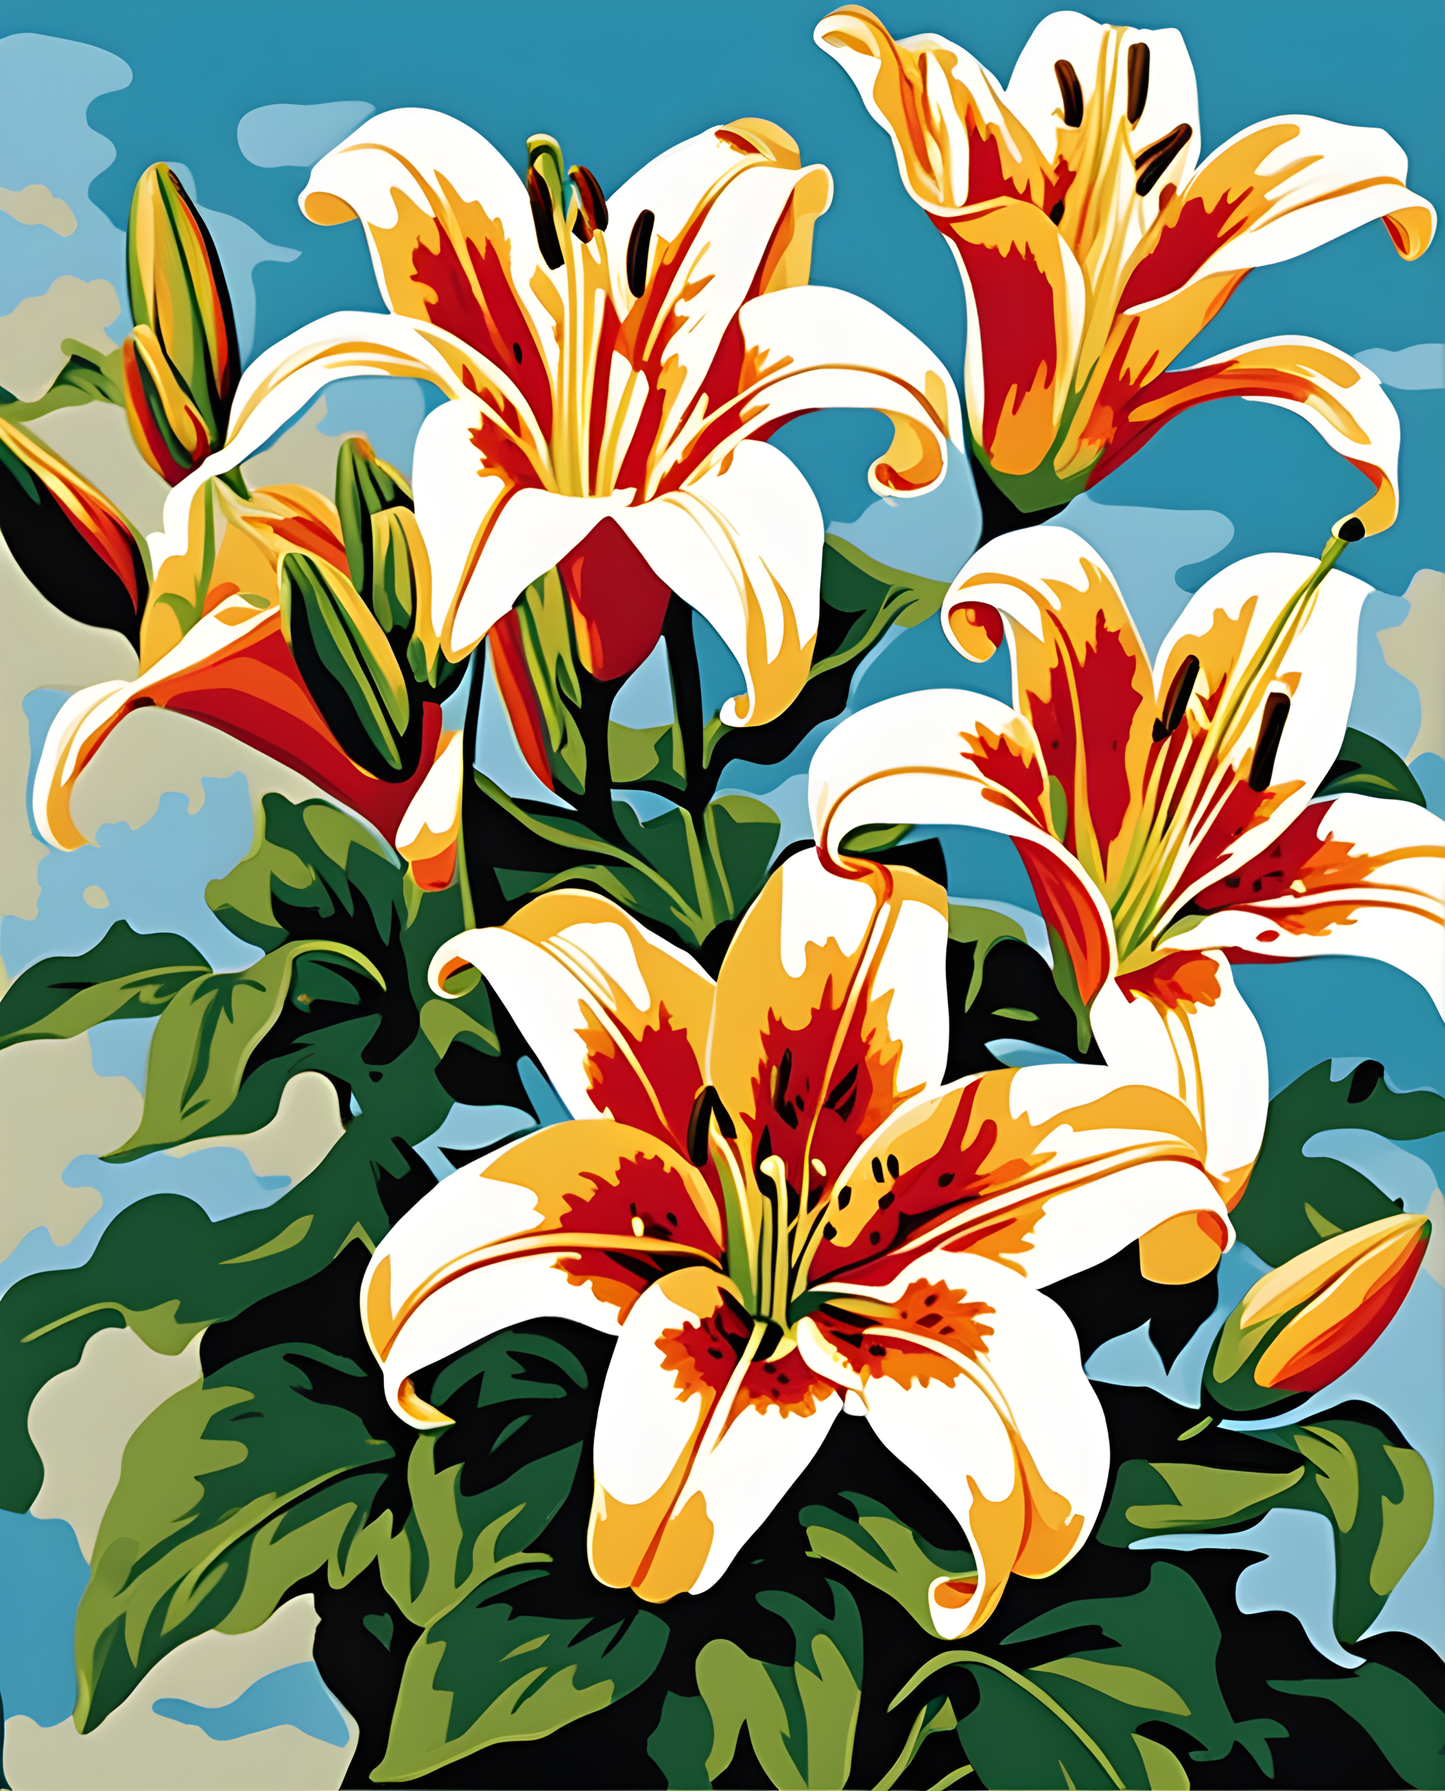 Flowers Collection OD (25) - Lily - Van-Go Paint-By-Number Kit